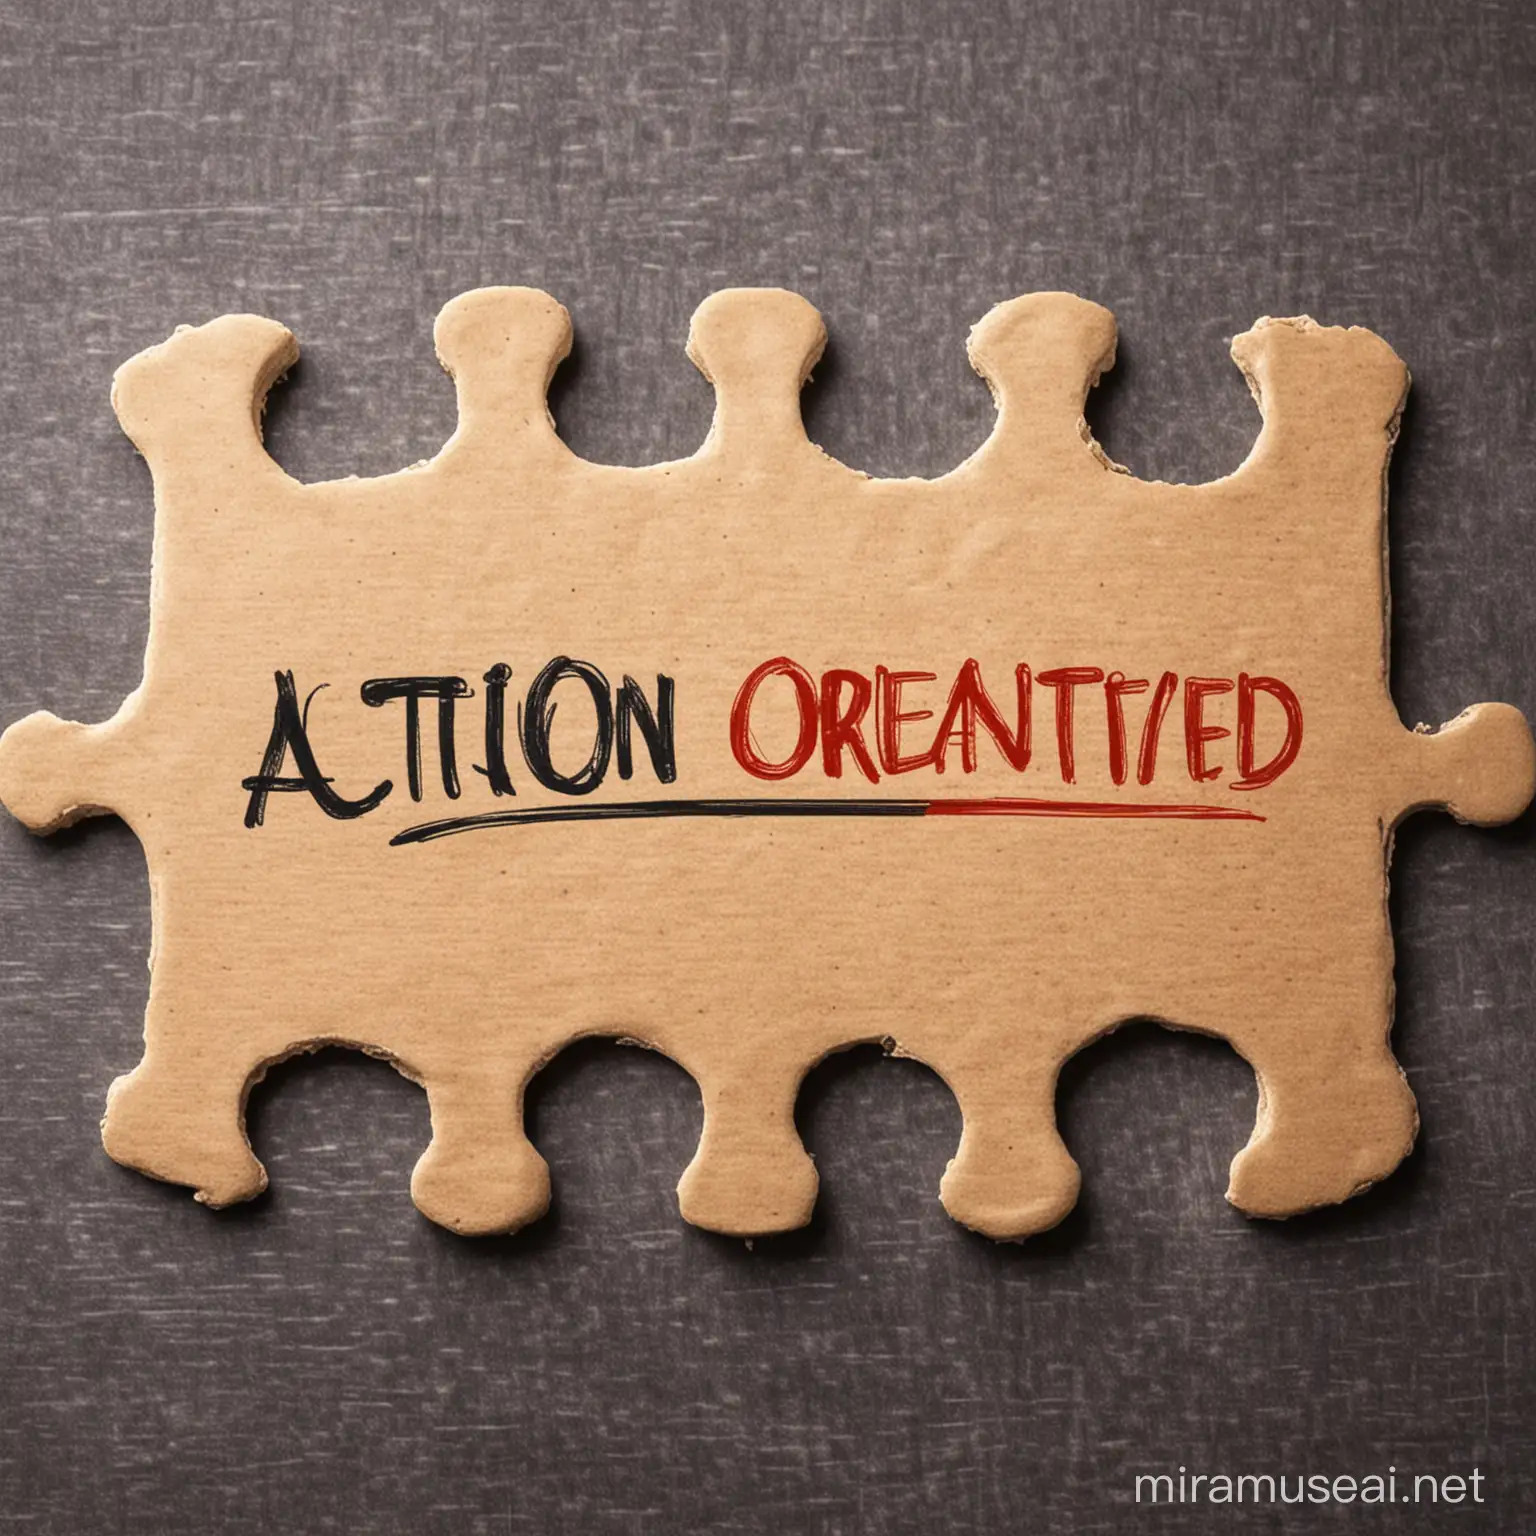 action oriented approach
